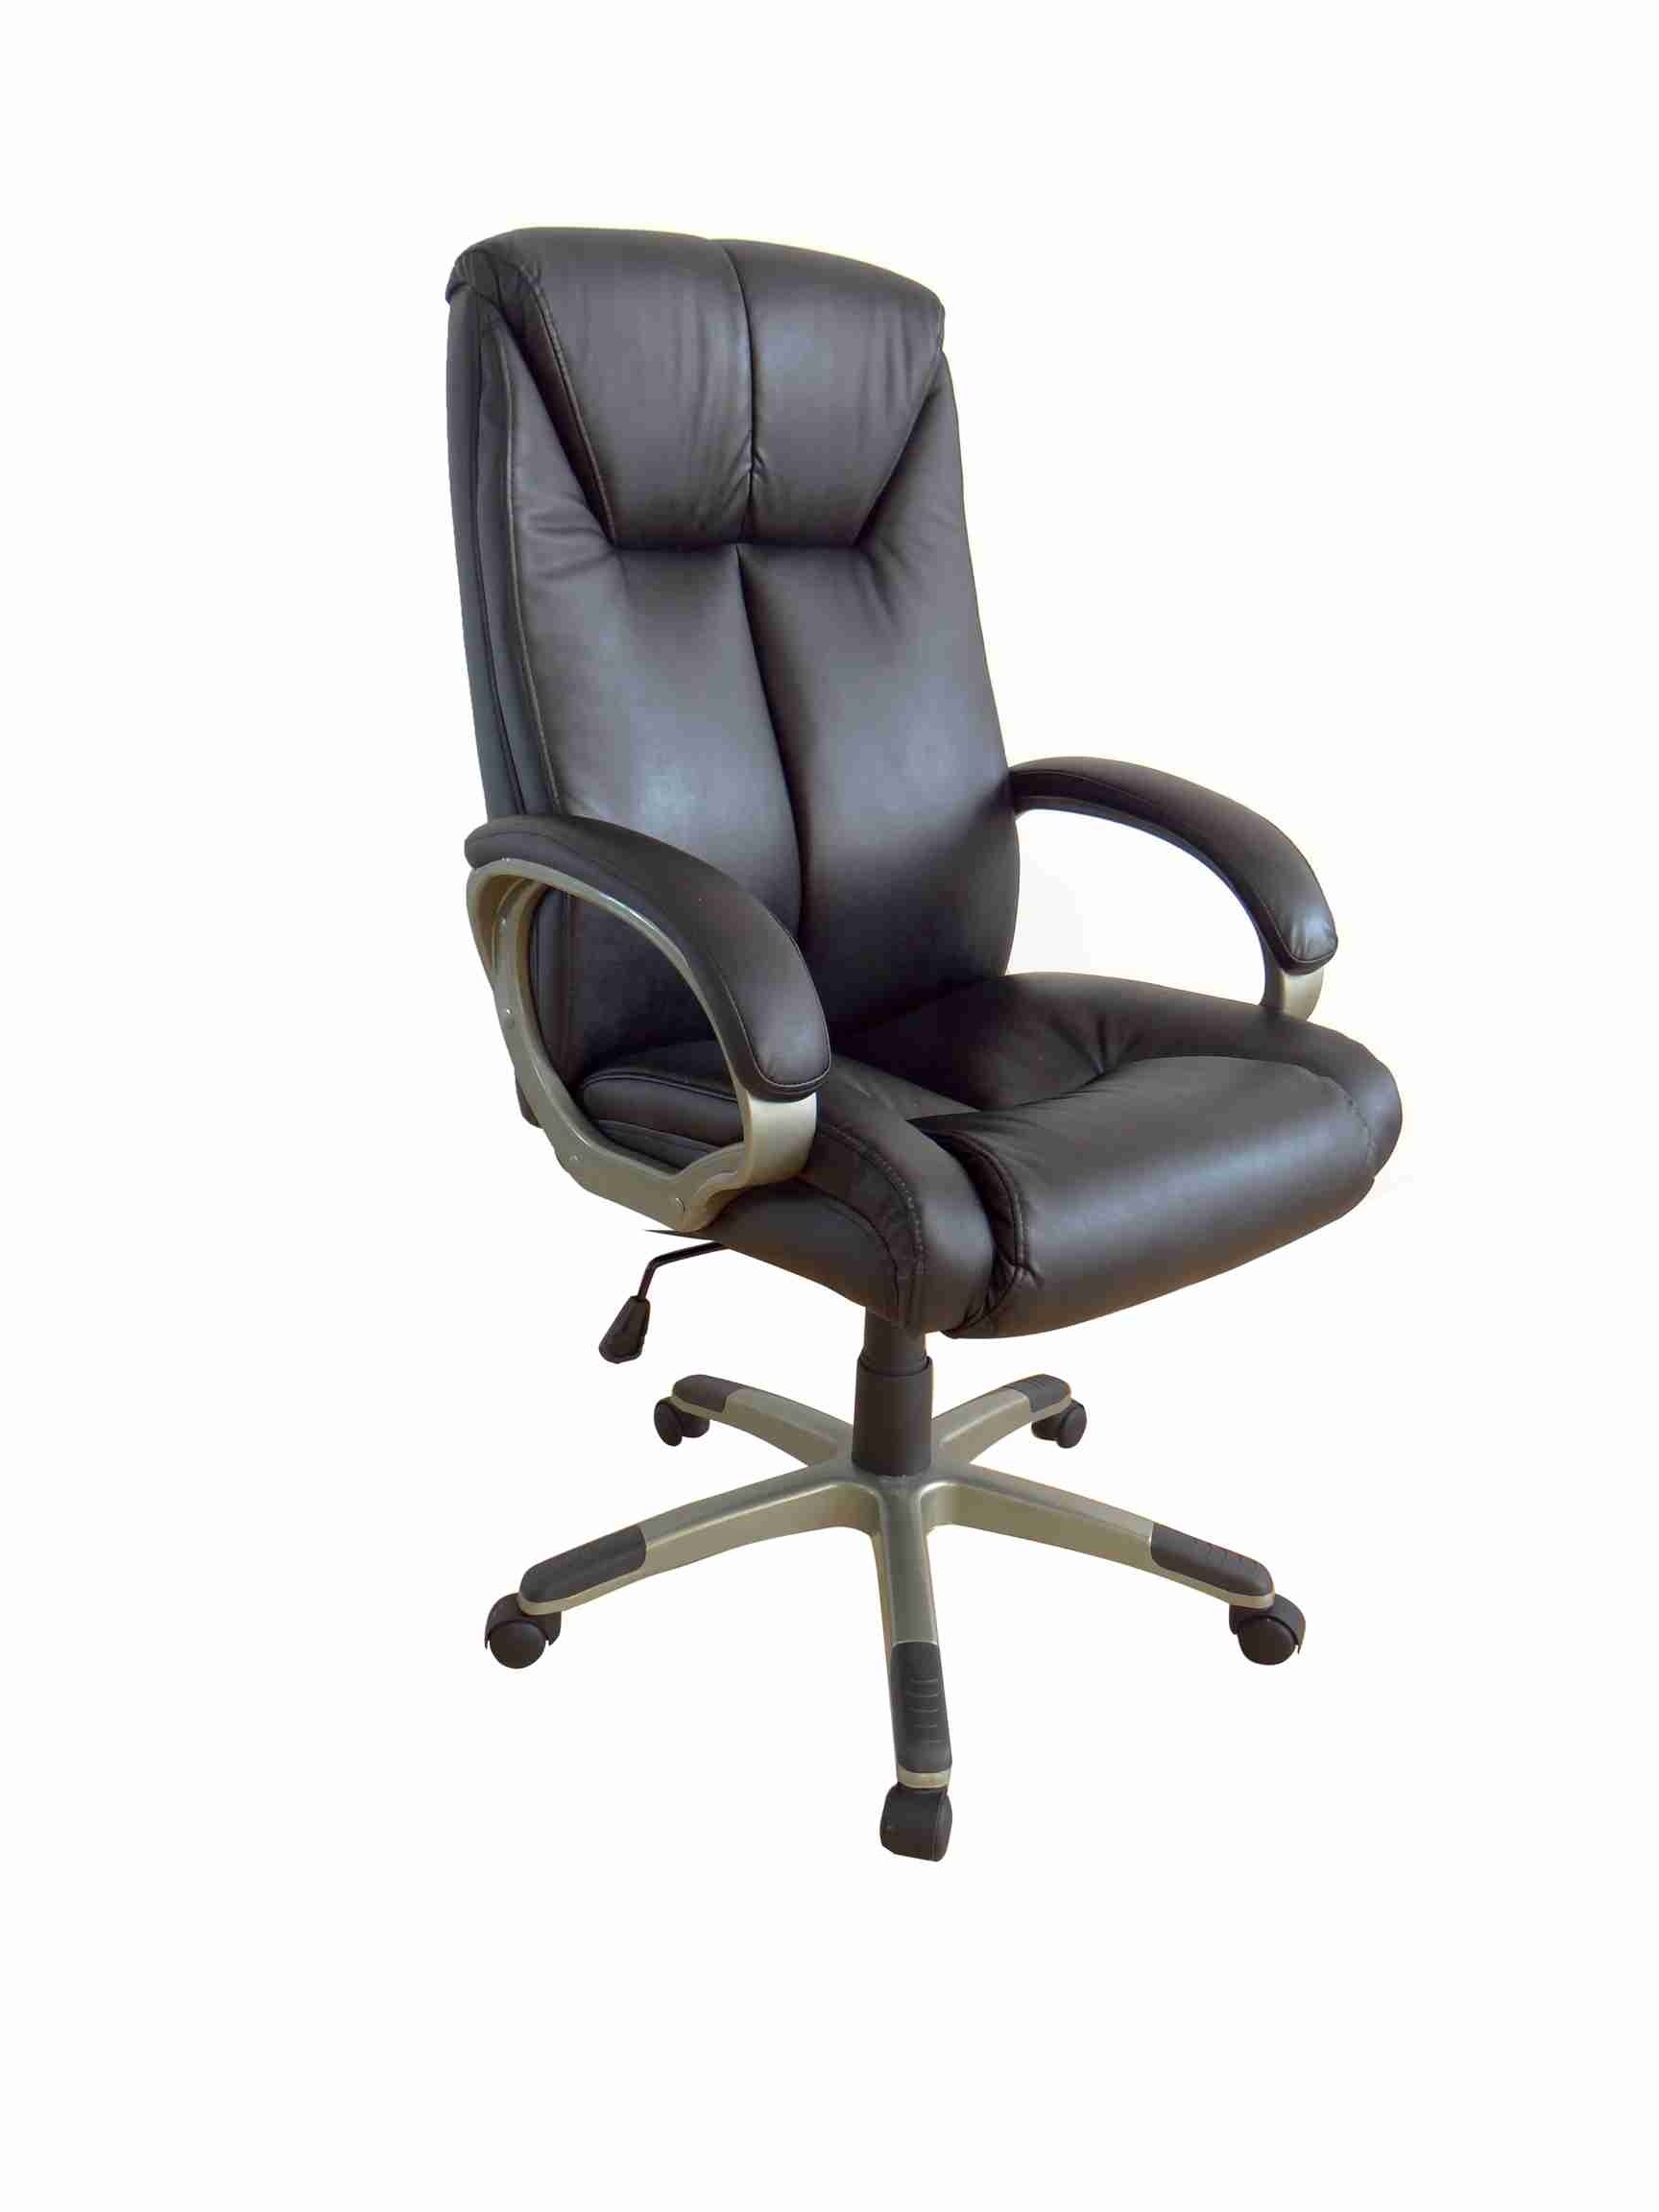 Office, Executive, Leader Chair With Bounded Leather And Adjustable Height-10765